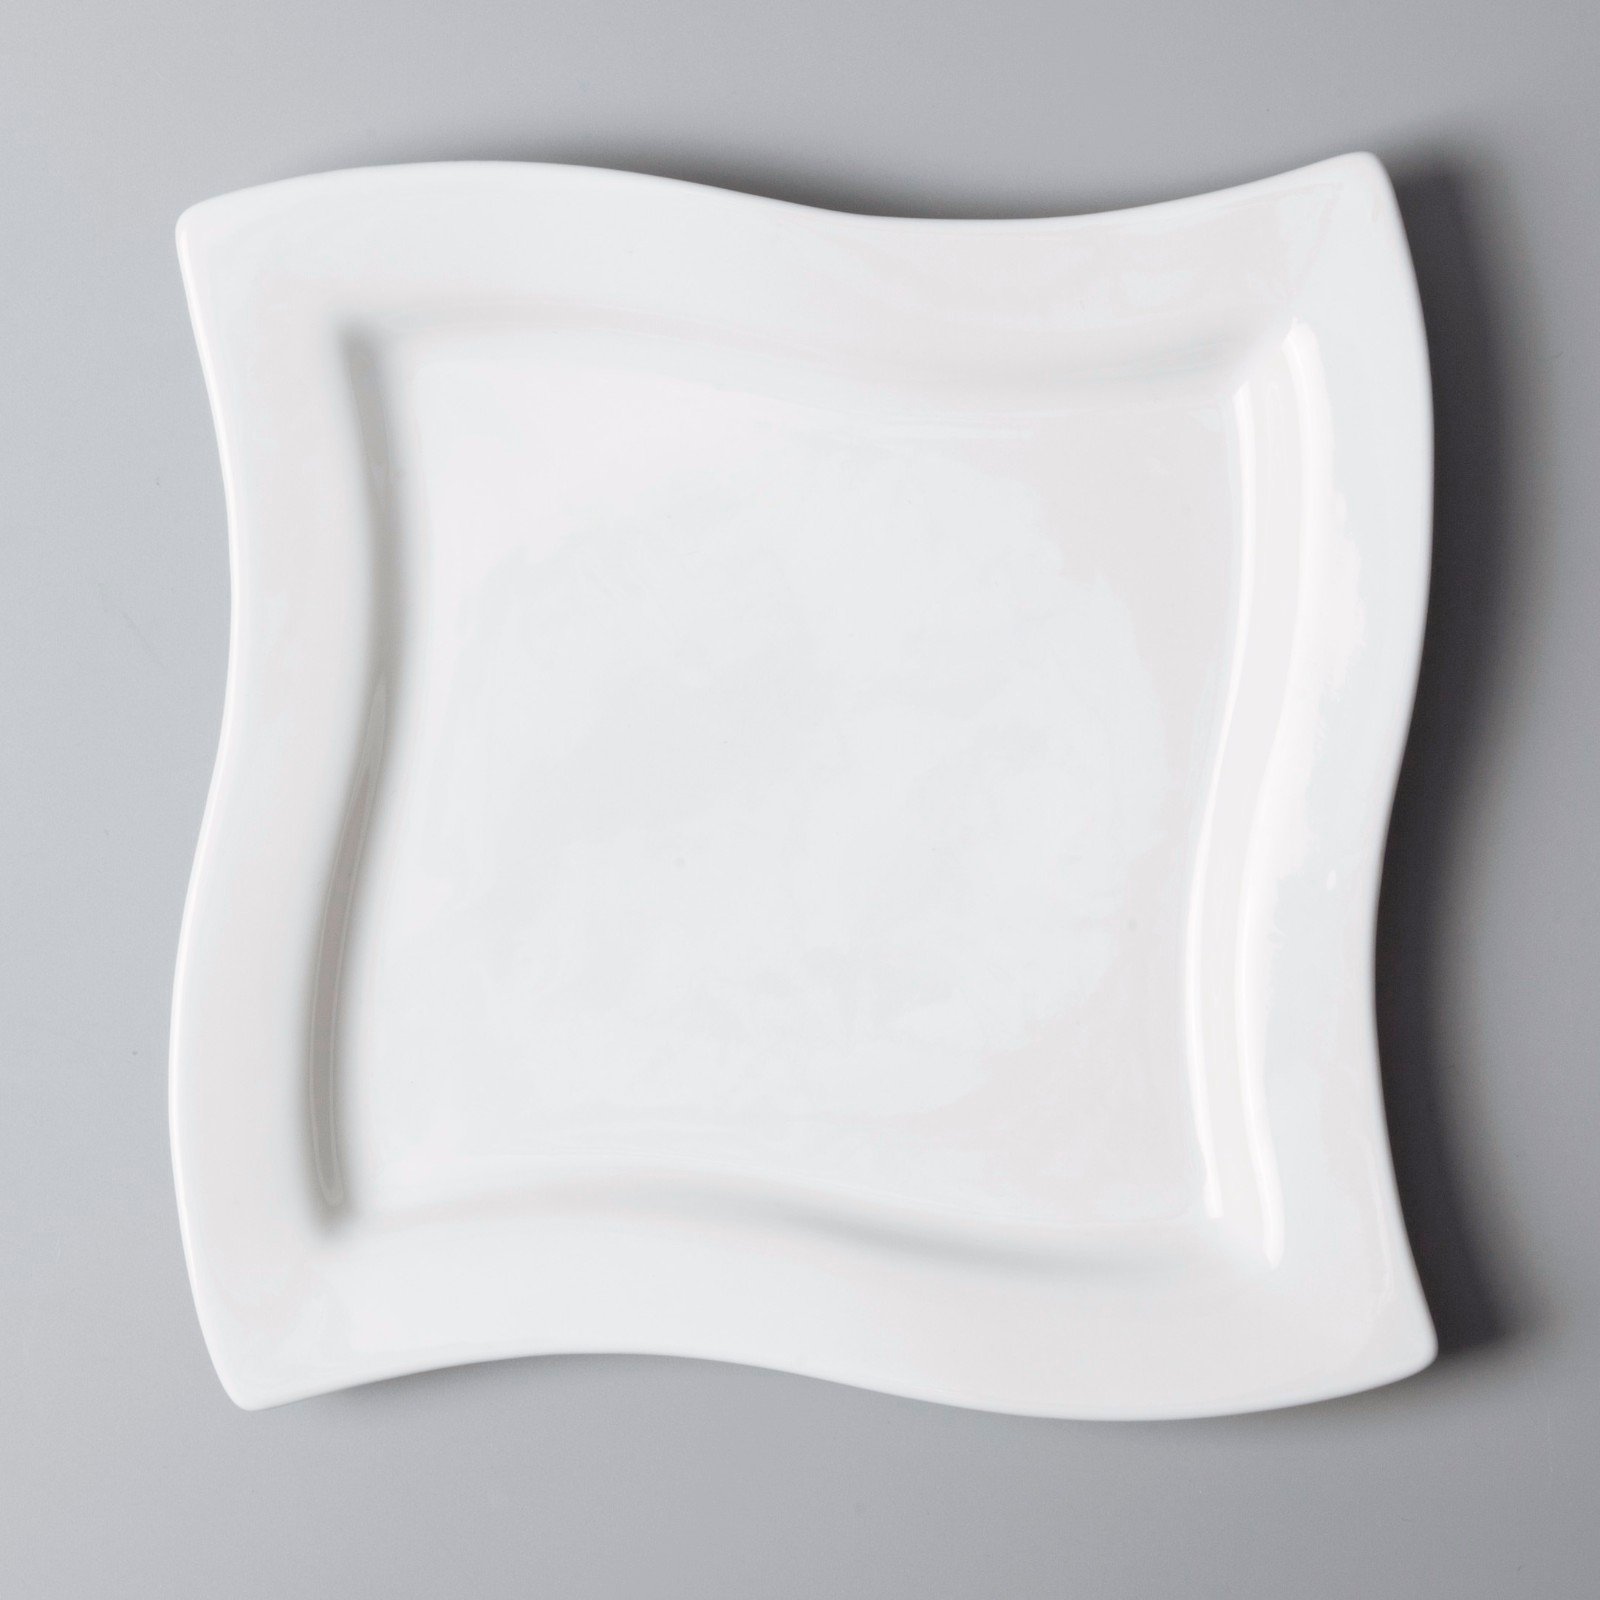 simply fine porcelain plates customized for hotel-4